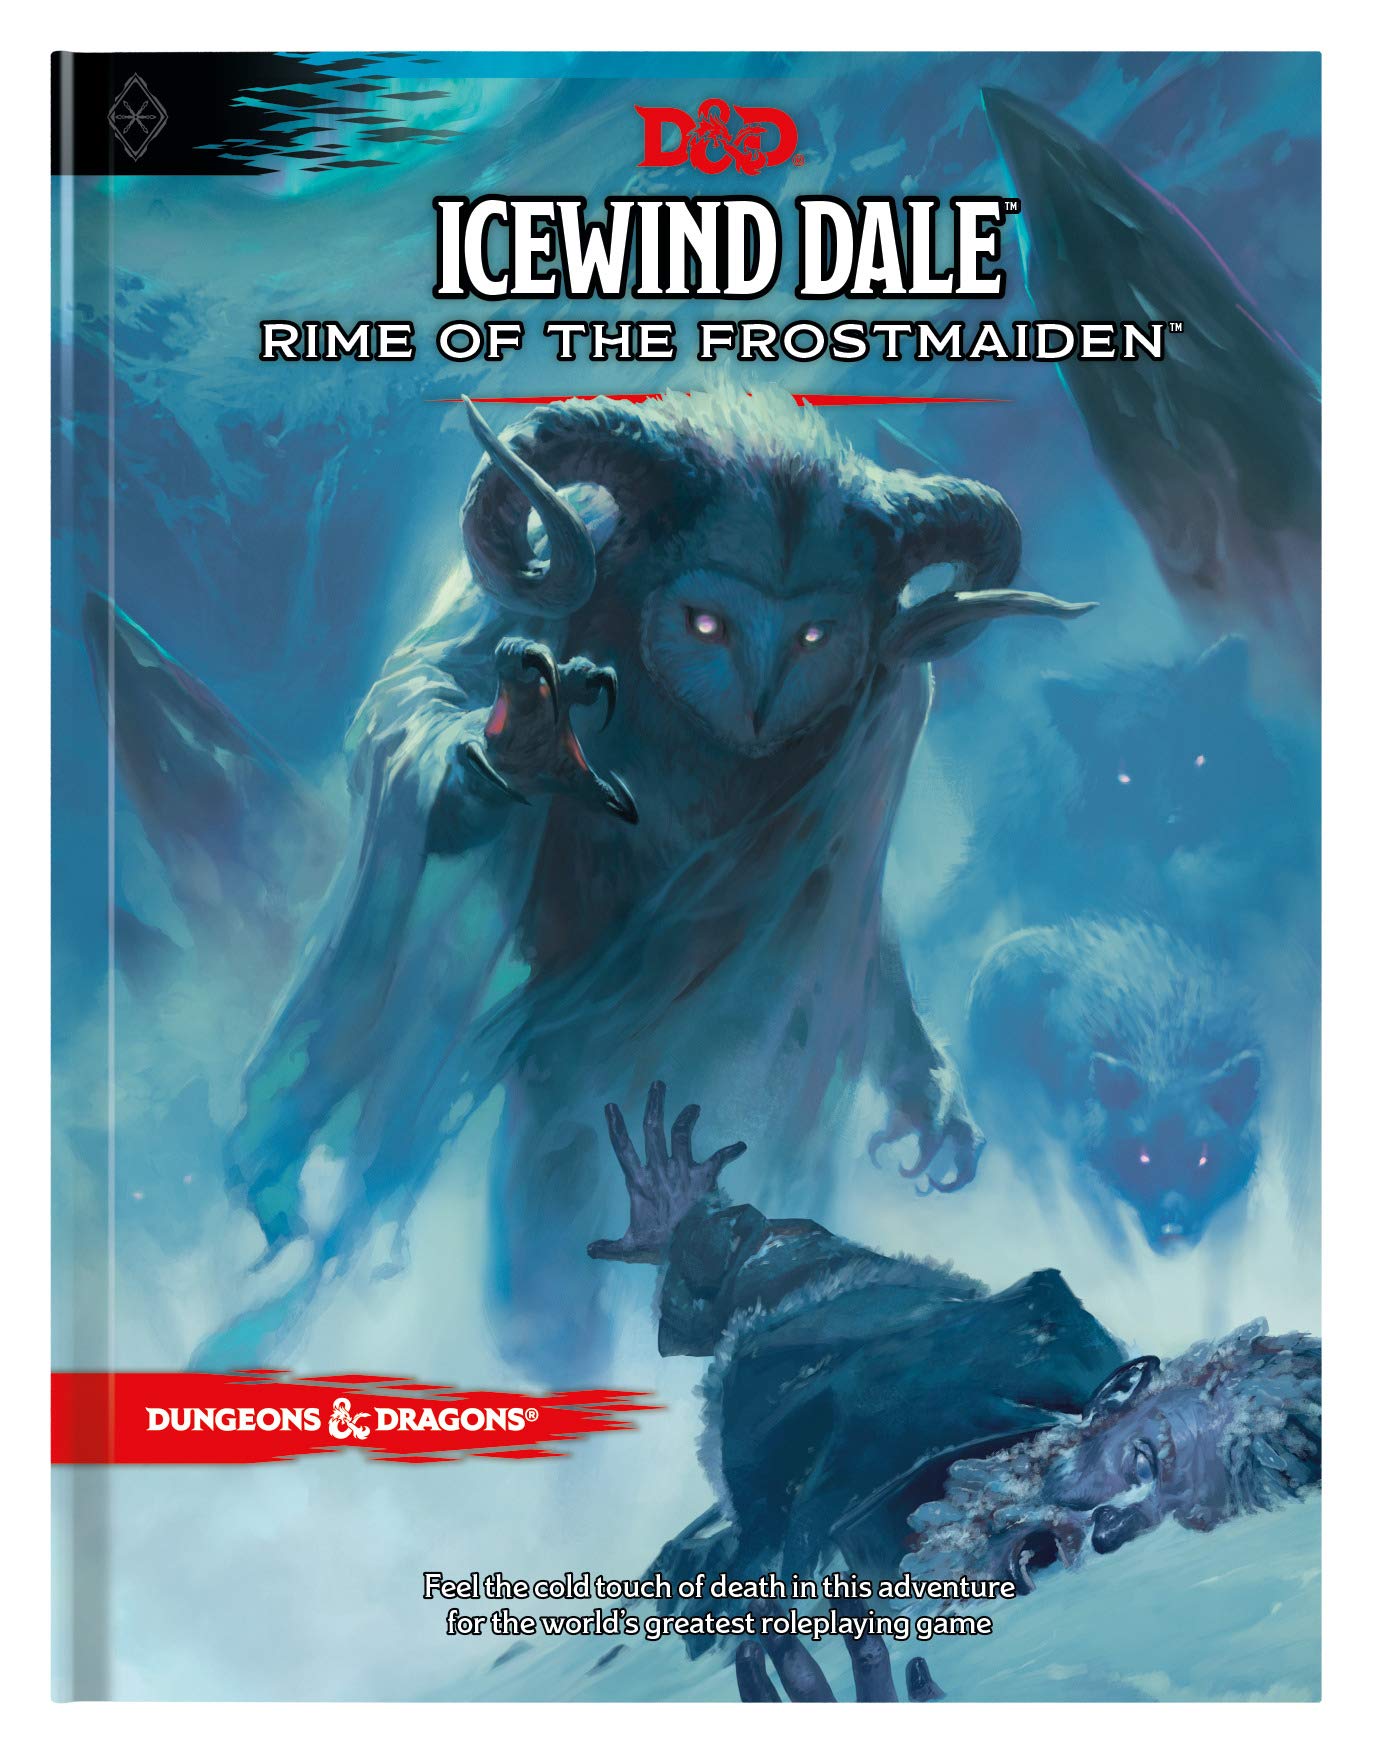 Dungeons & Dragons 5E - Icewind Dale Rime of the Frostmaiden